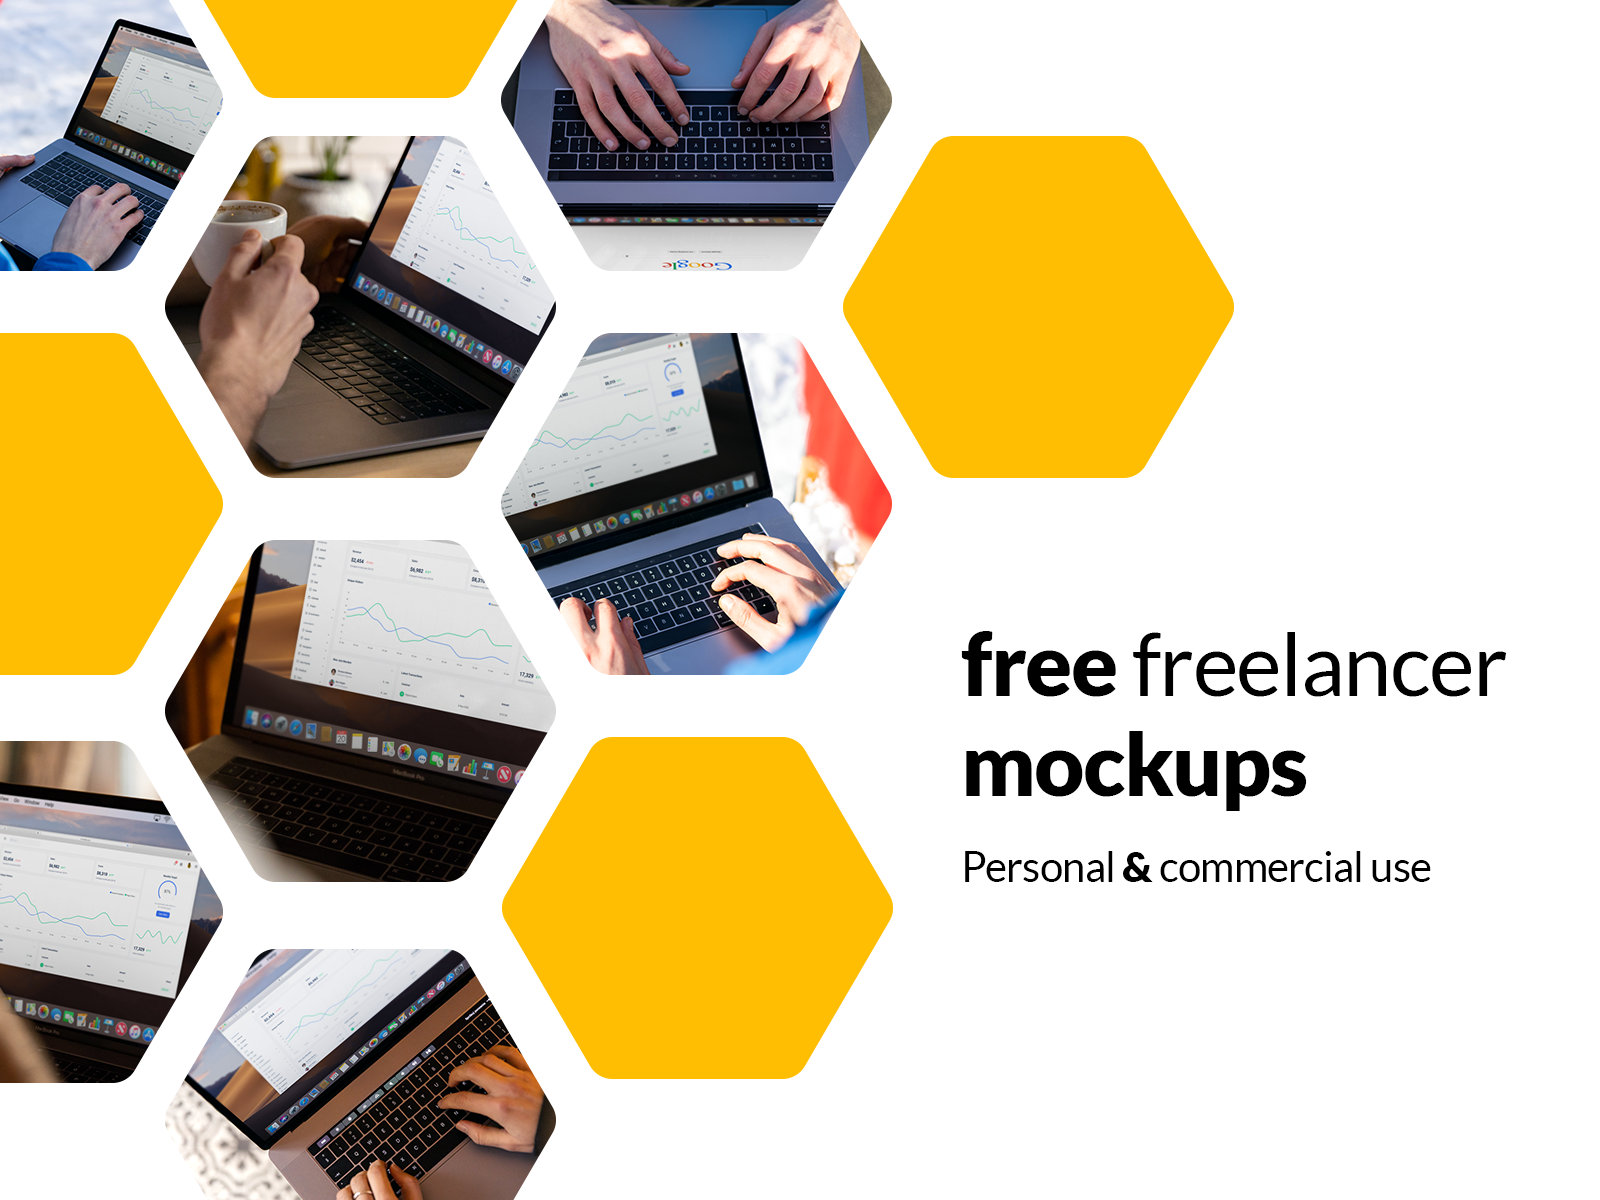 Download Free Mockups With Apple Macbook Screens By Piotr Pawlowski For Firmbee Com On Dribbble